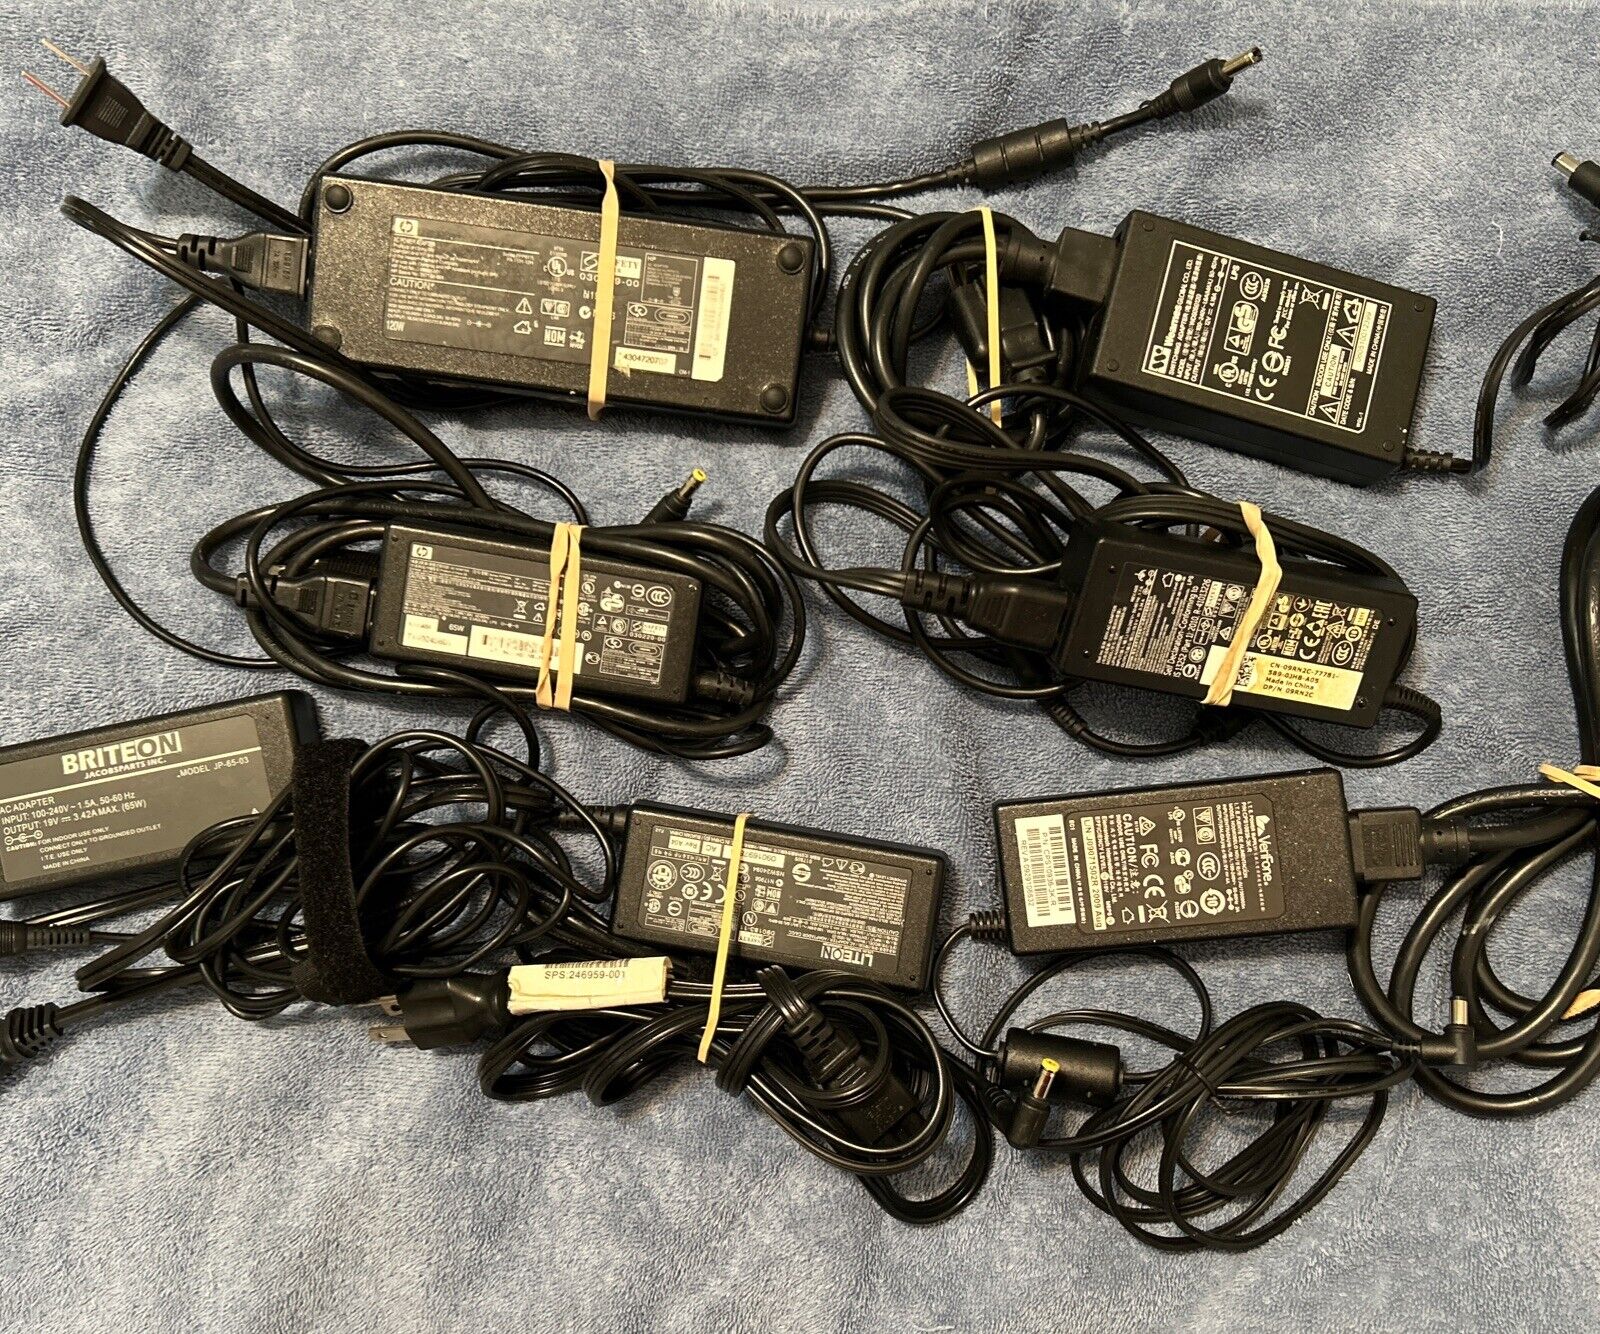 LOT OF 7 Various Laptop Power Supply Adapters Chargers HP, BriteOn, Dell, More